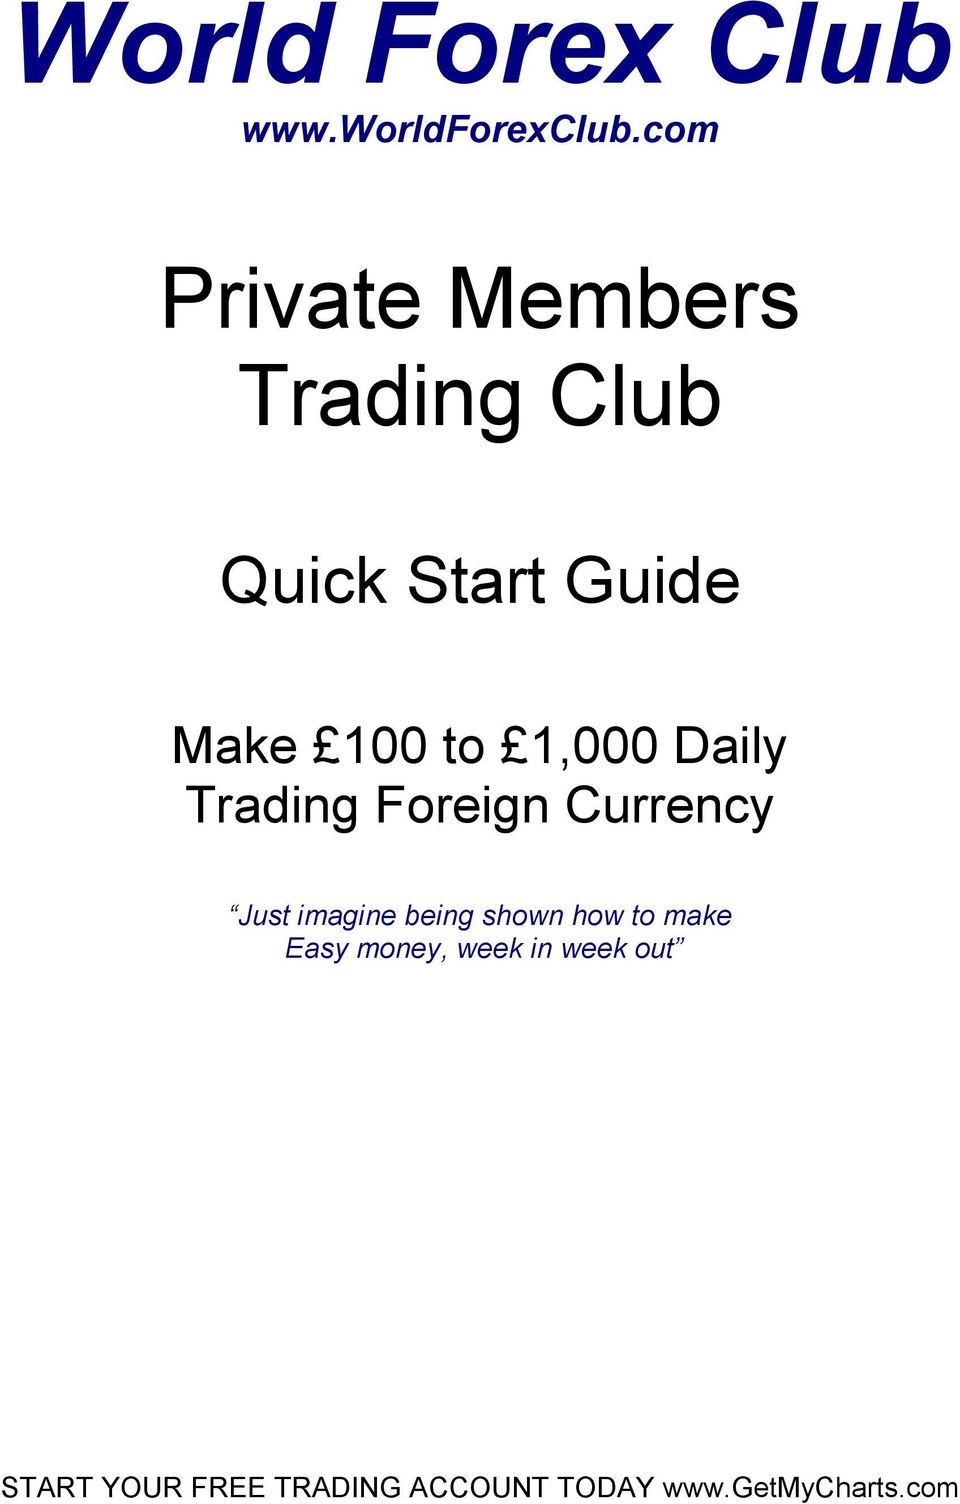 Make 100 to 1,000 Daily Trading Foreign Currency